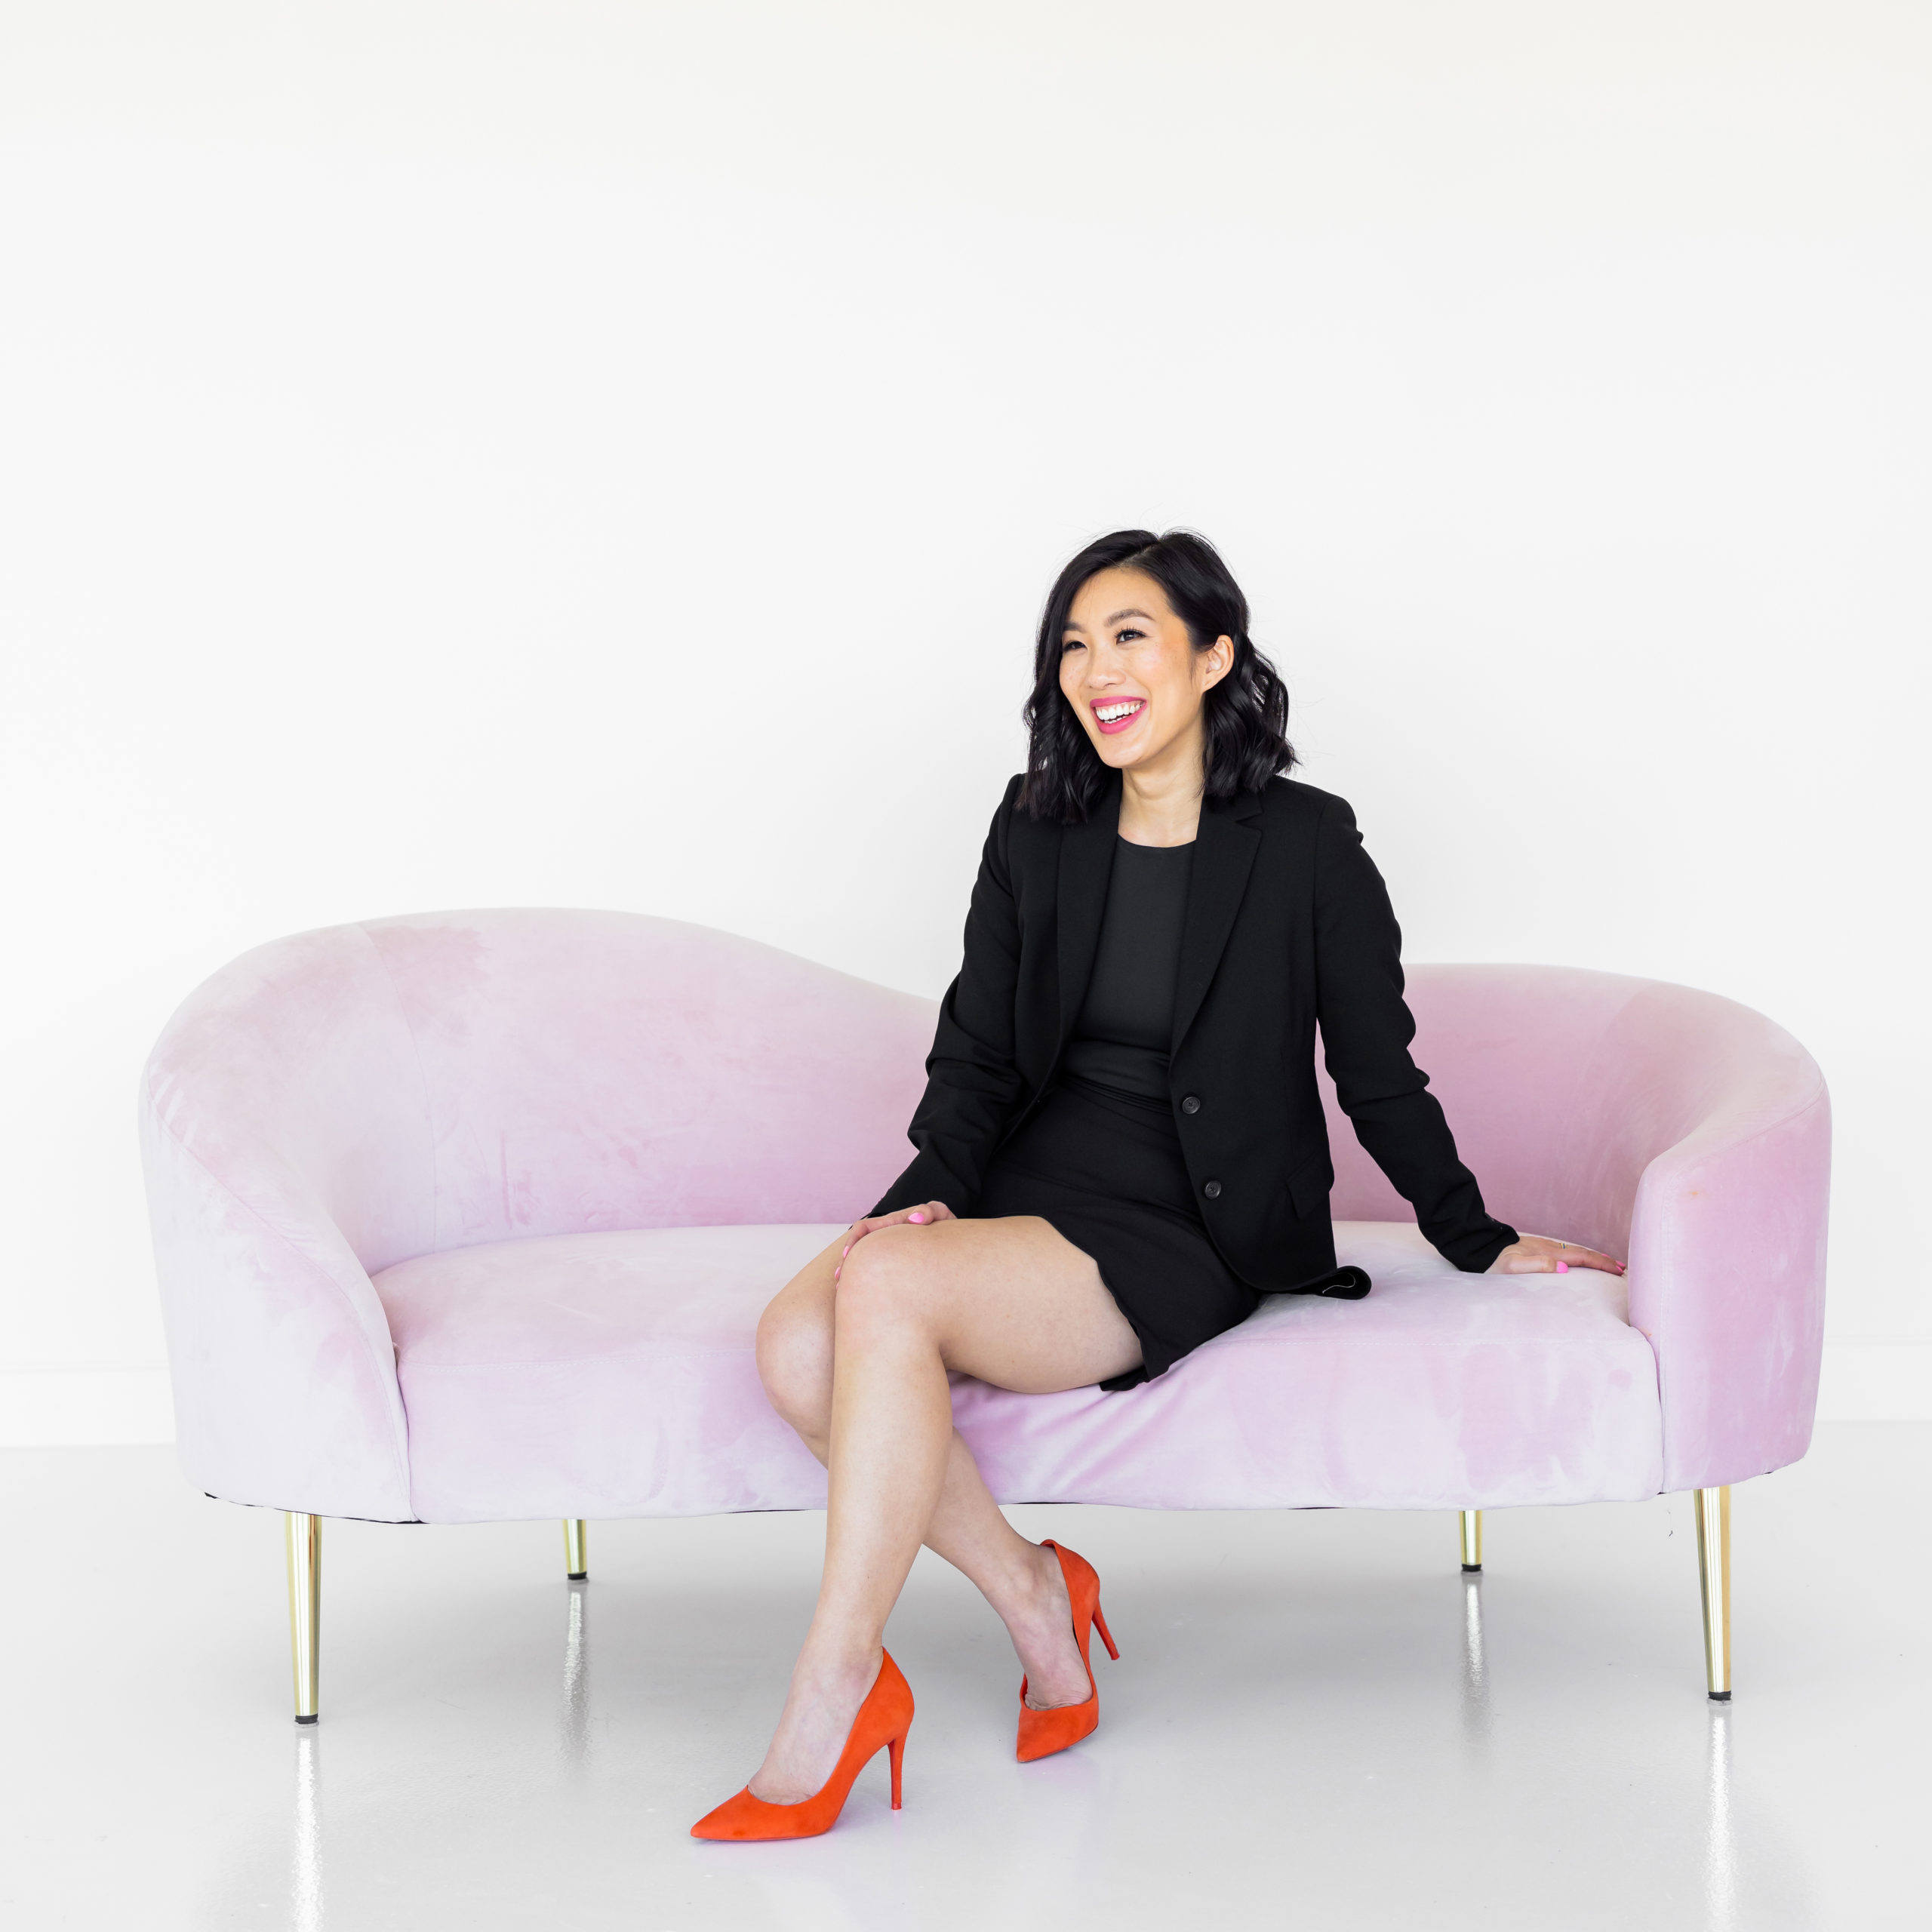 Asian woman in a black skirt and blazer and orange pumps sitting on a pink couch